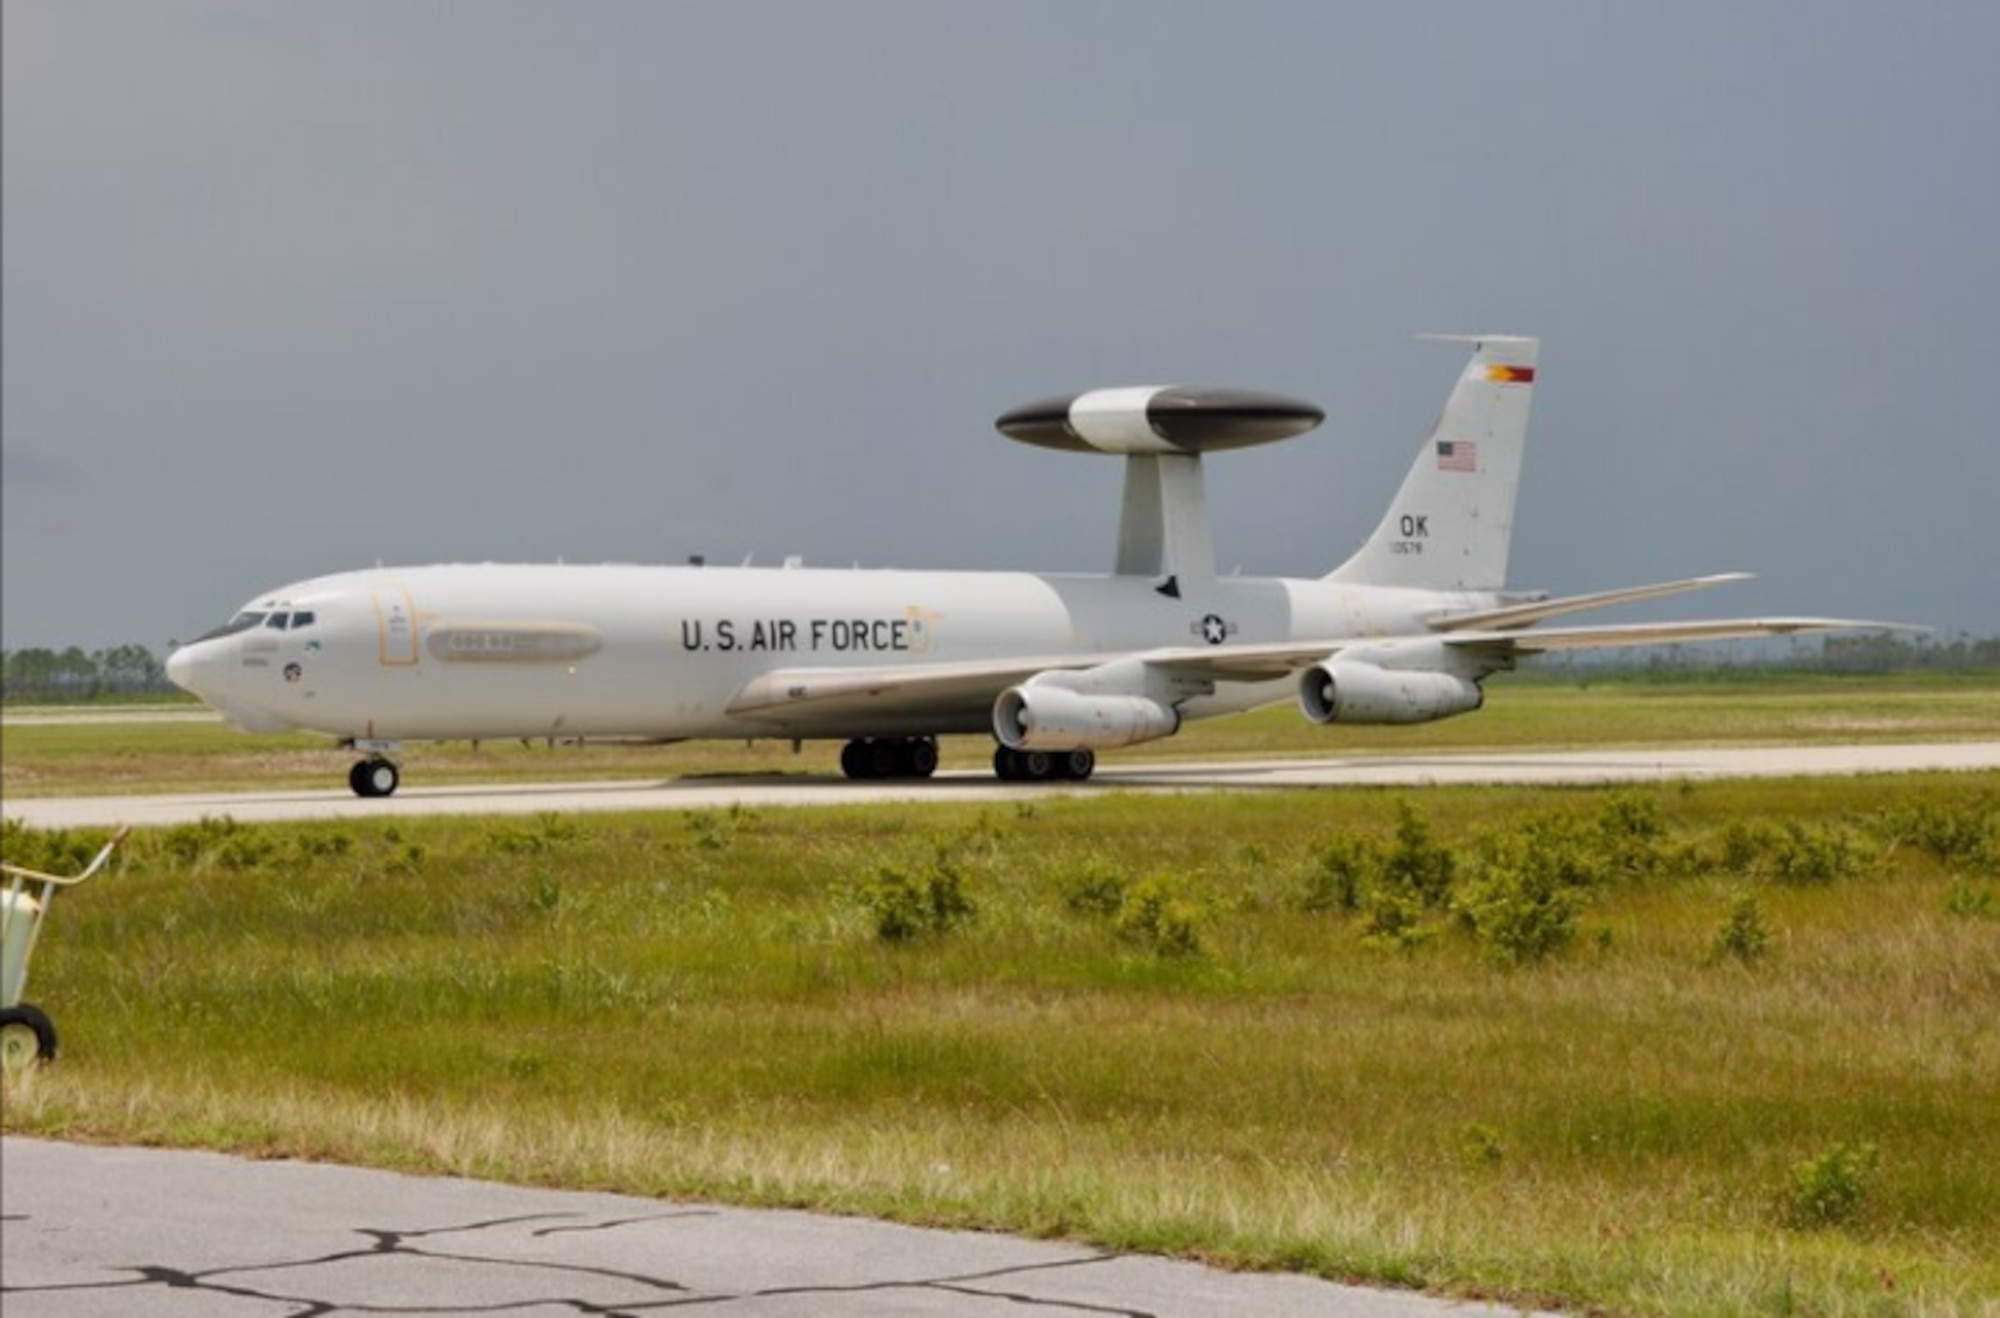 An E-3 Sentry lands at Tyndall AFB for the first ever COMBAT Sentry Weapons System Evaluation Program. This is the exercise was the Micro Ground System was tested (U.S. Air Force photo by 1st Lt Savanah Bray)